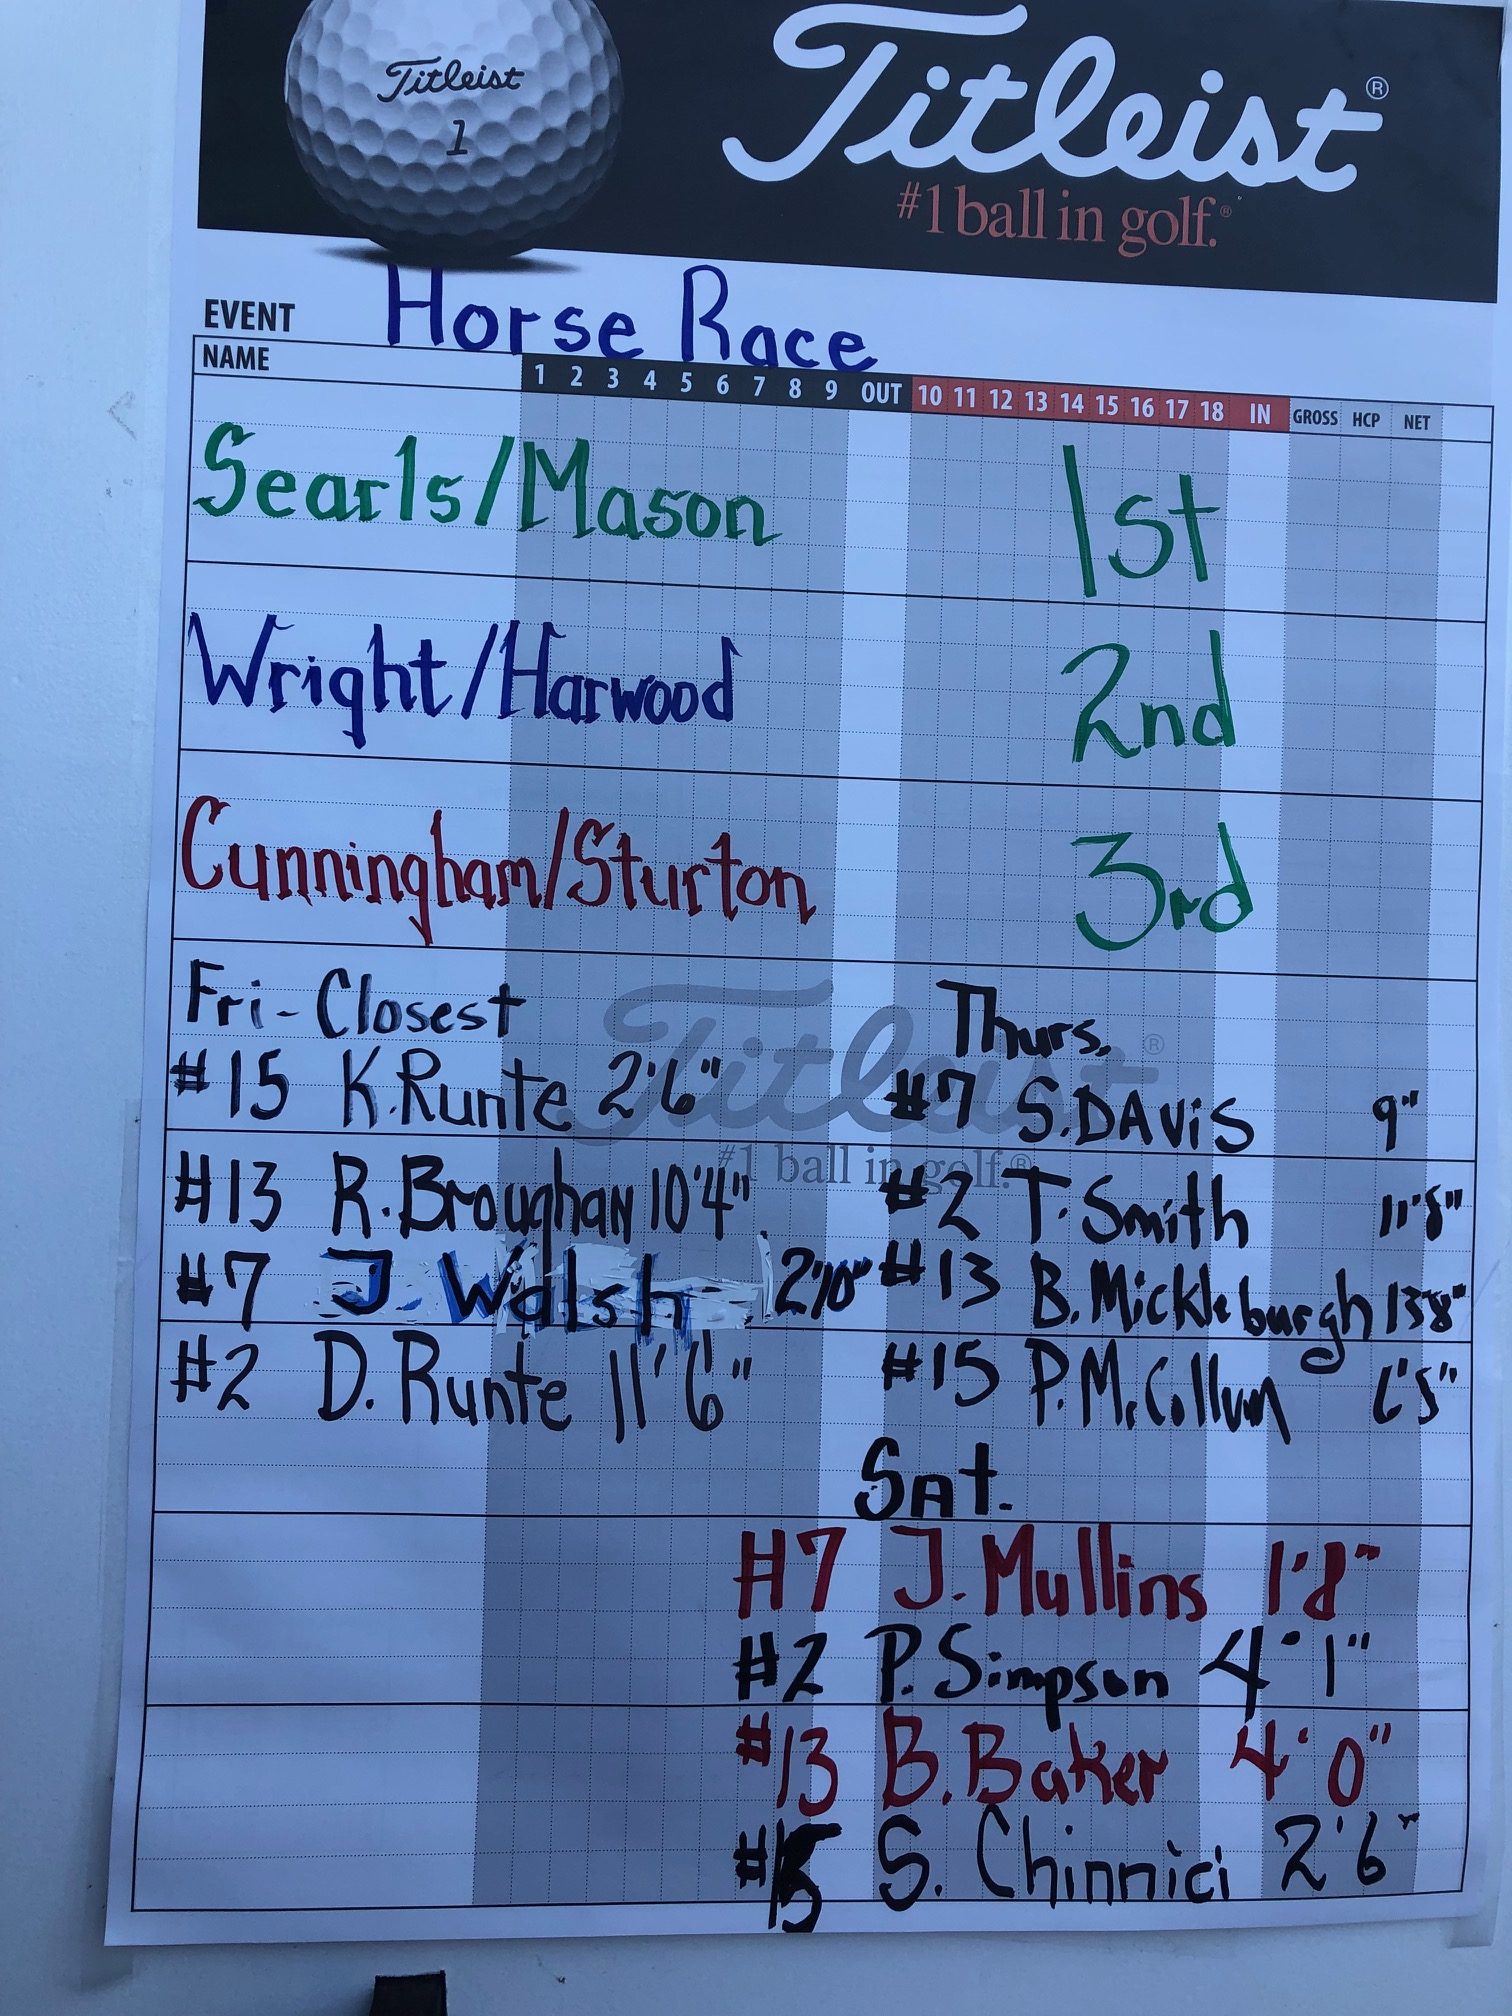 Horse Race Results